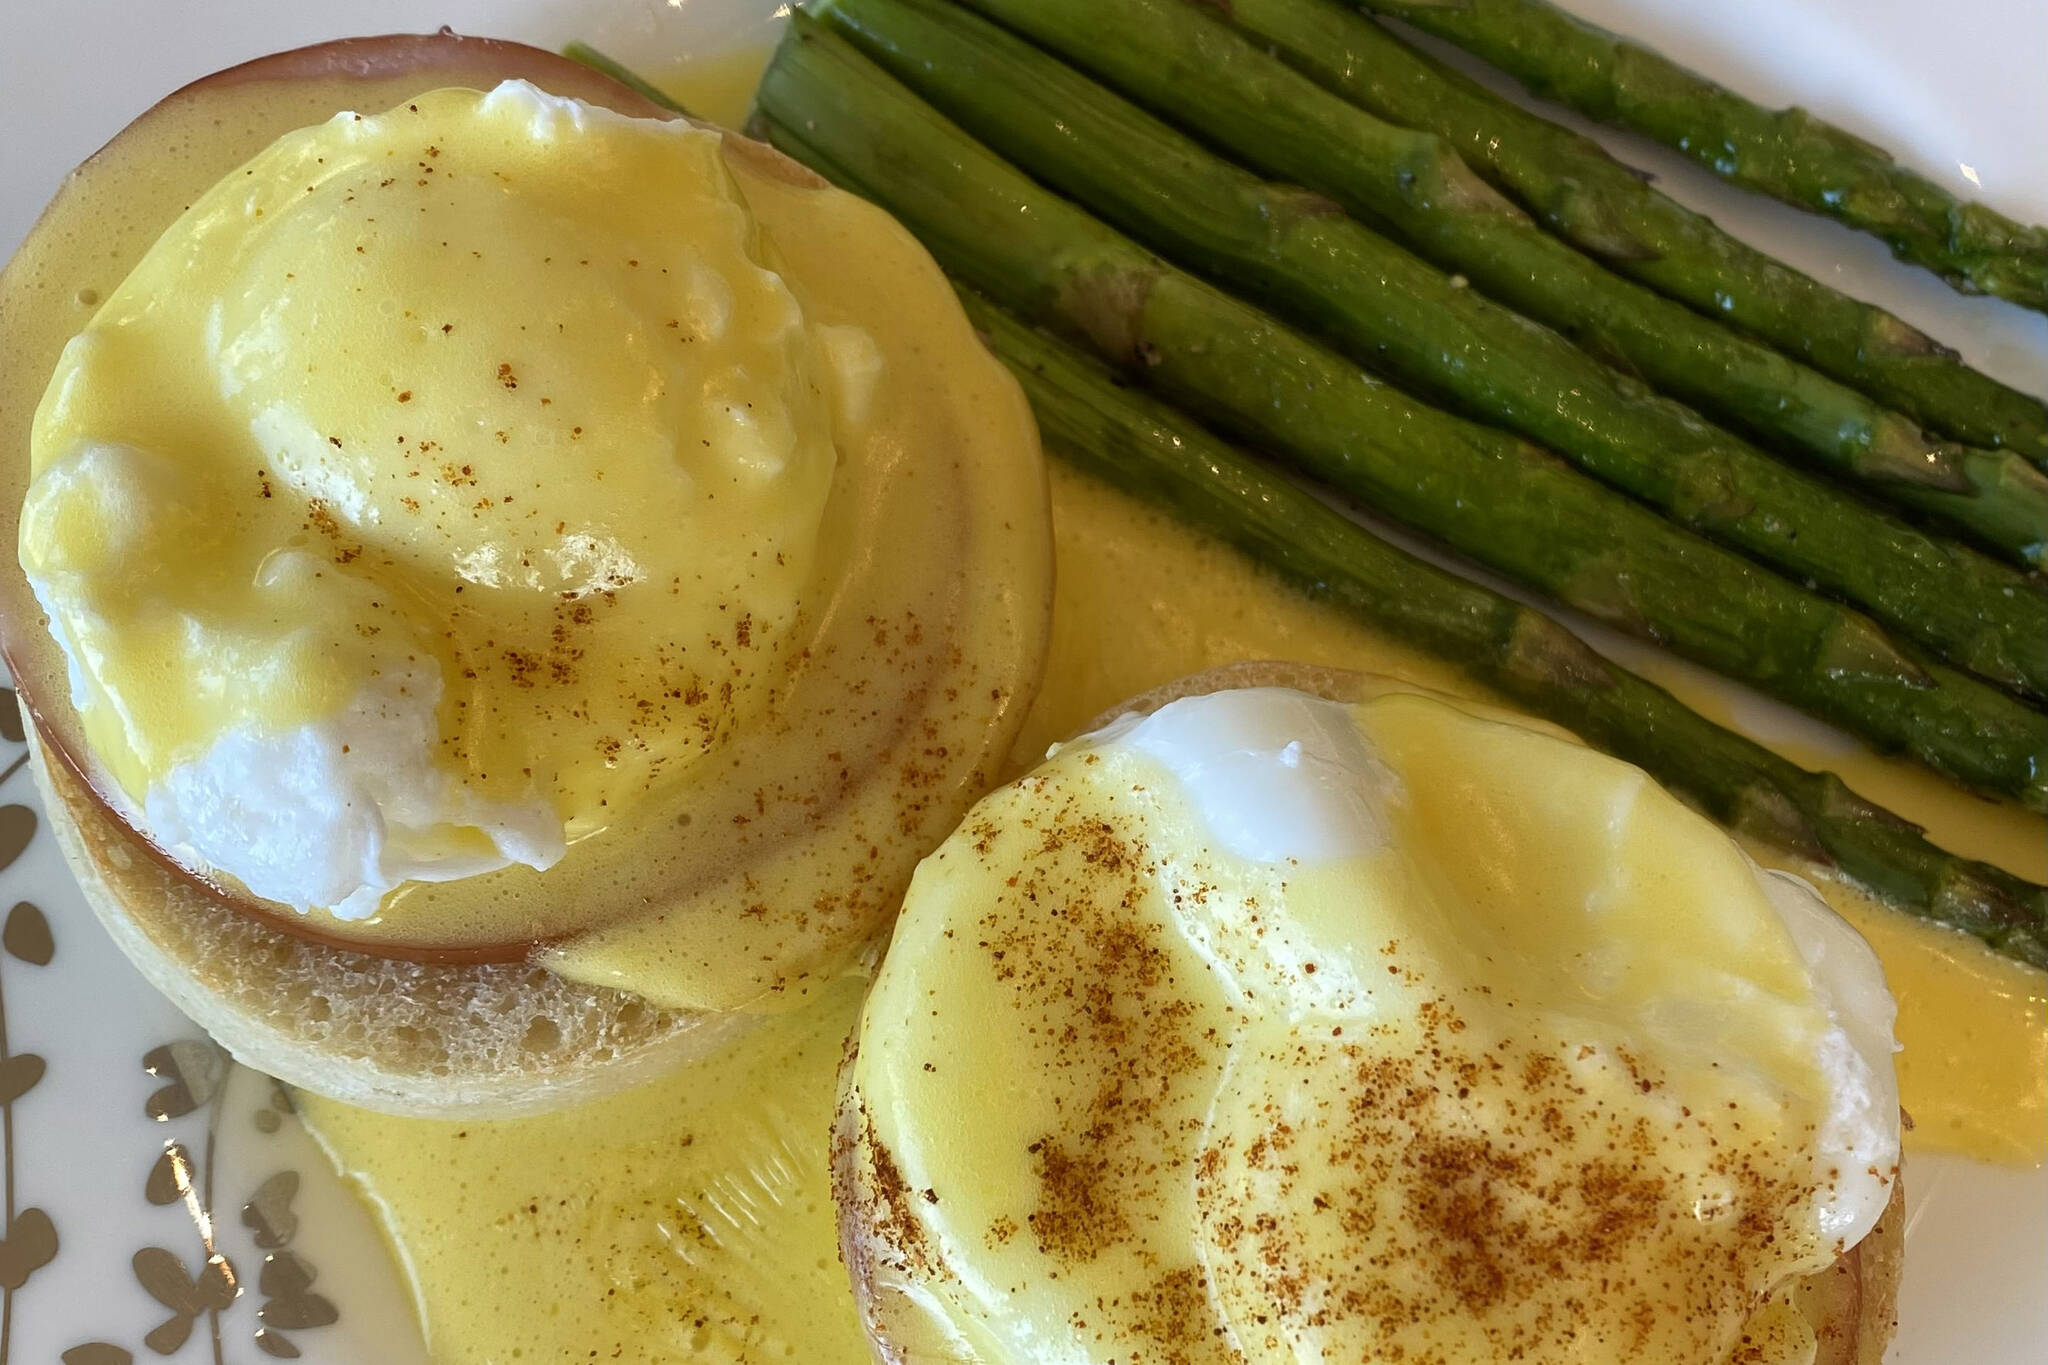 Hollandaise sauce is served on poached eggs. (Tressa Dale / Peninsula Clarion)